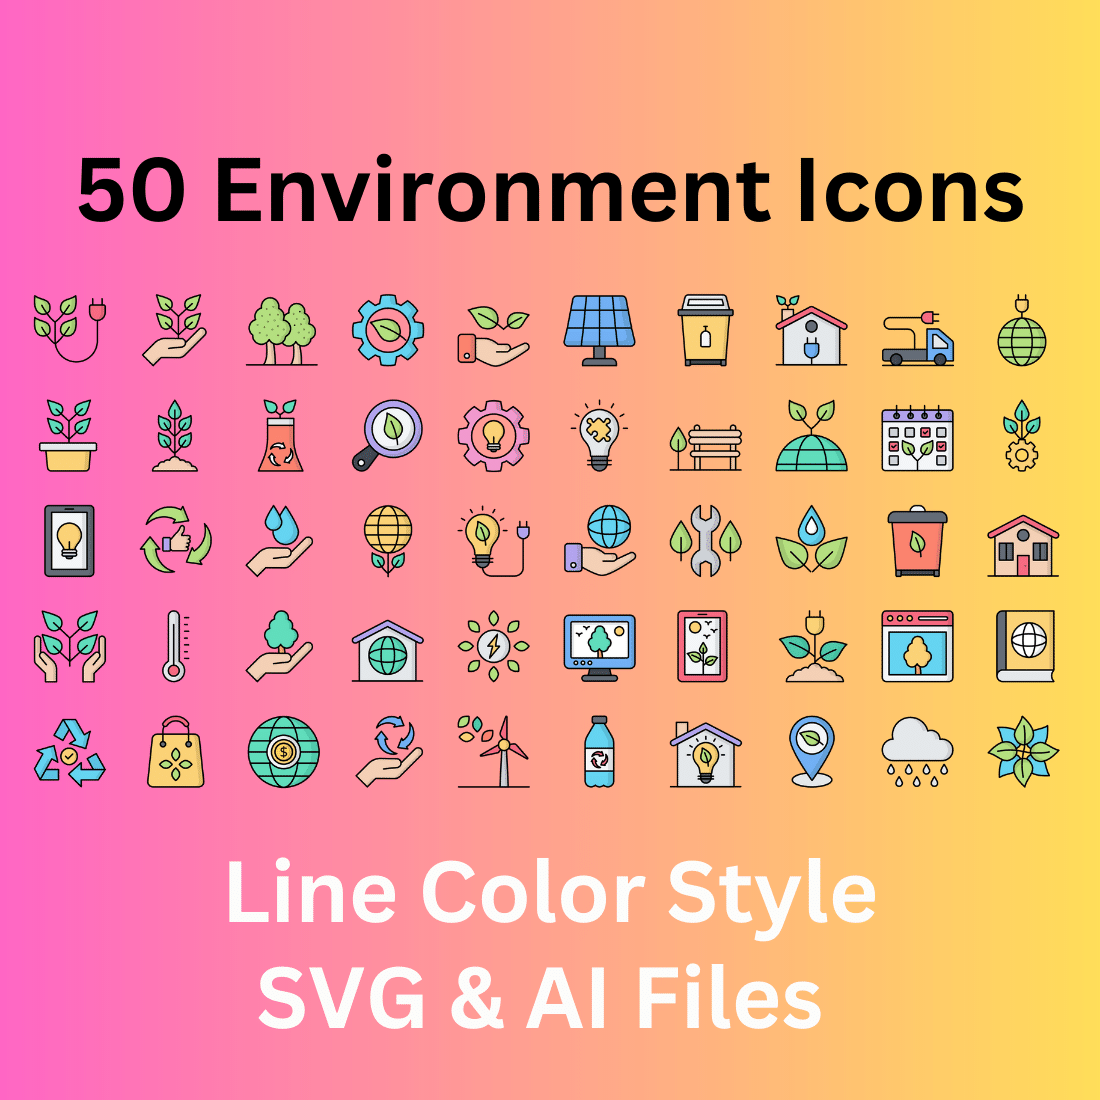 Environment Icon Set 50 Line Color Icons - SVG And AI Files cover image.